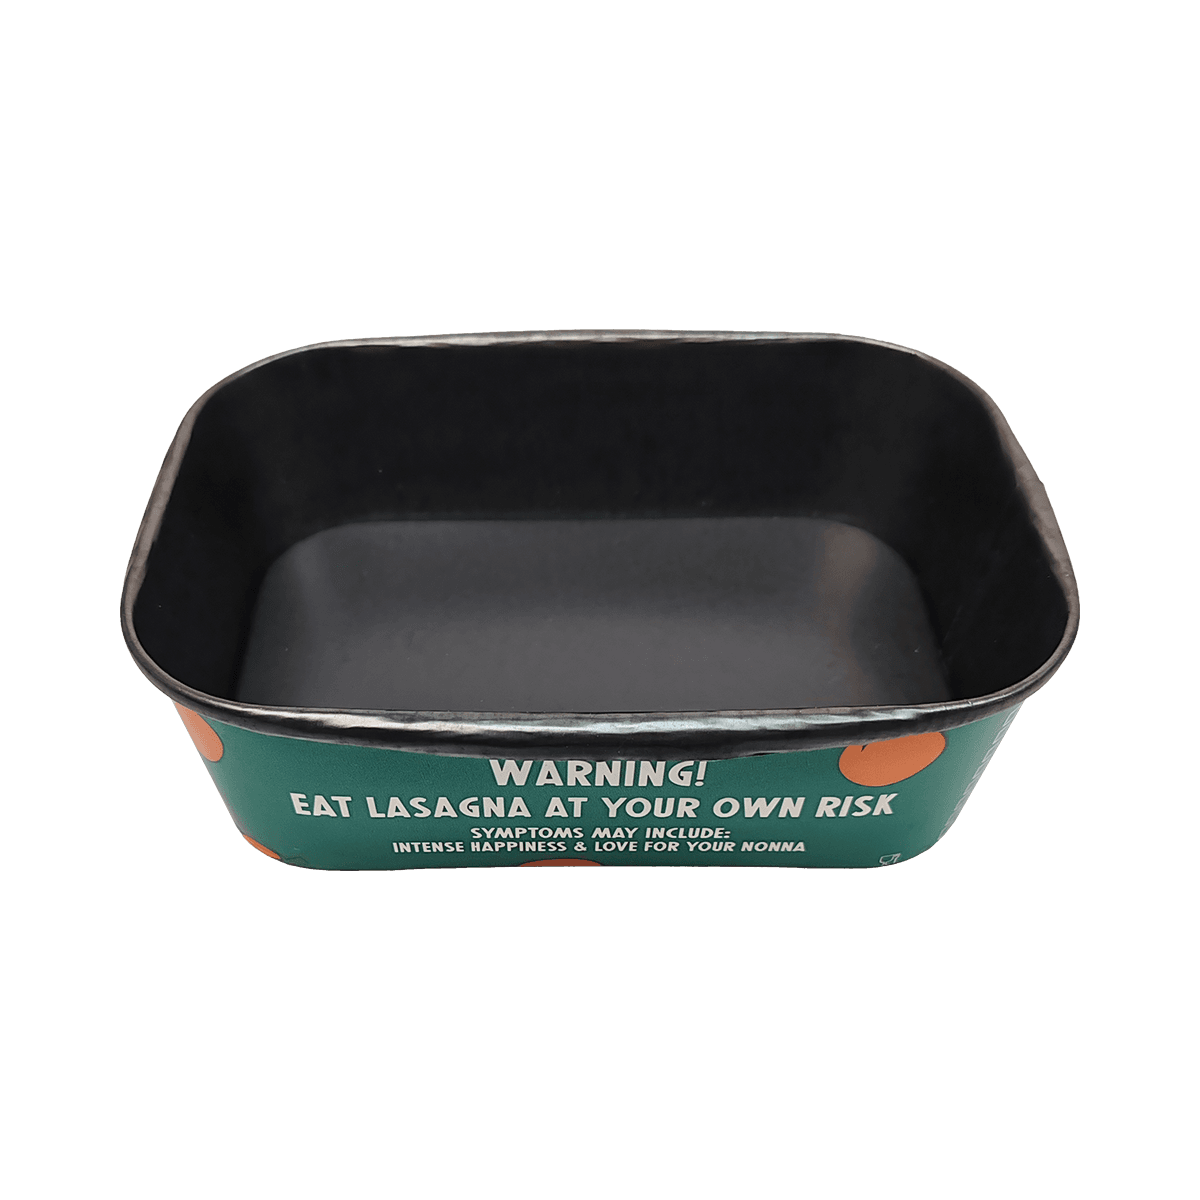 ZK-PAPER-001 Disposable Takeaway With Lid Black Laminated Packaging Paper+CPET Food Tray